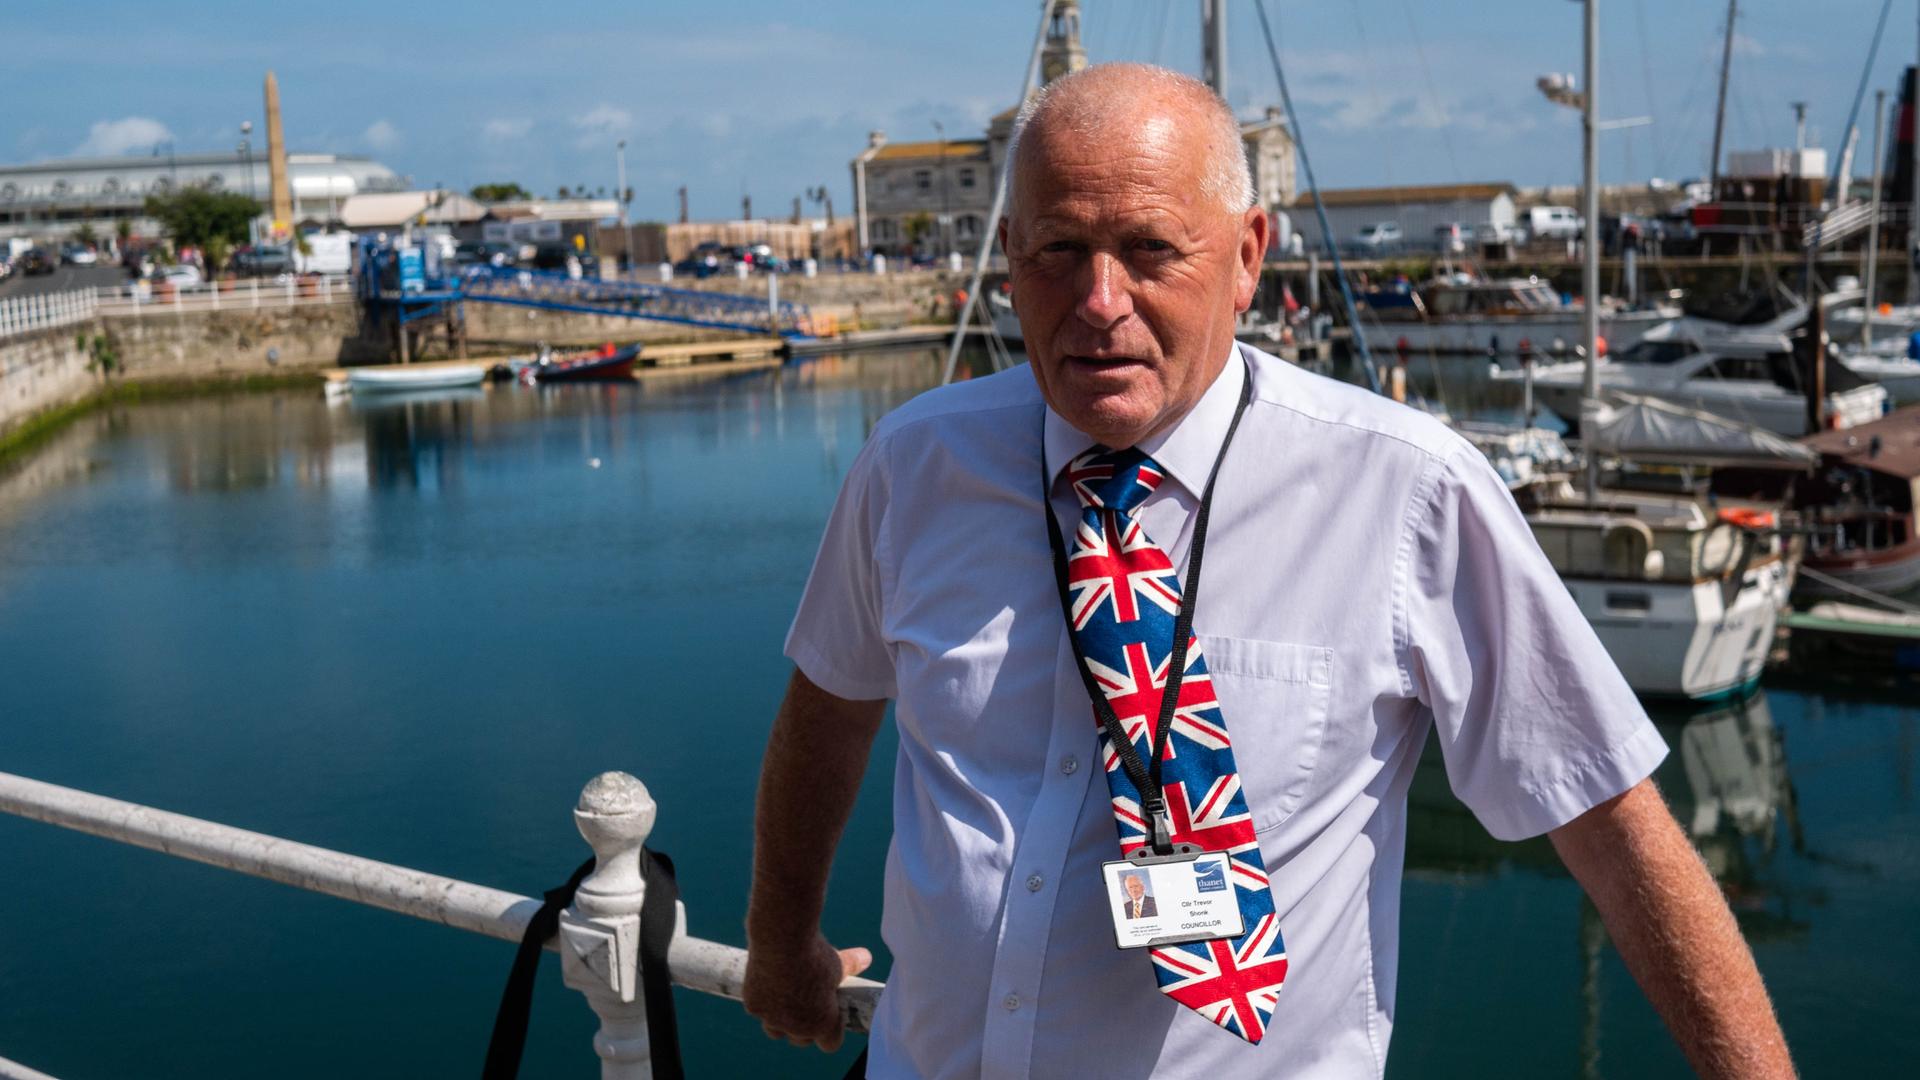 Trevor Shonk is mayor and city councillor in Ramsgate, a town on the coast of Kent, just across the English channel from the shoreline of France. 